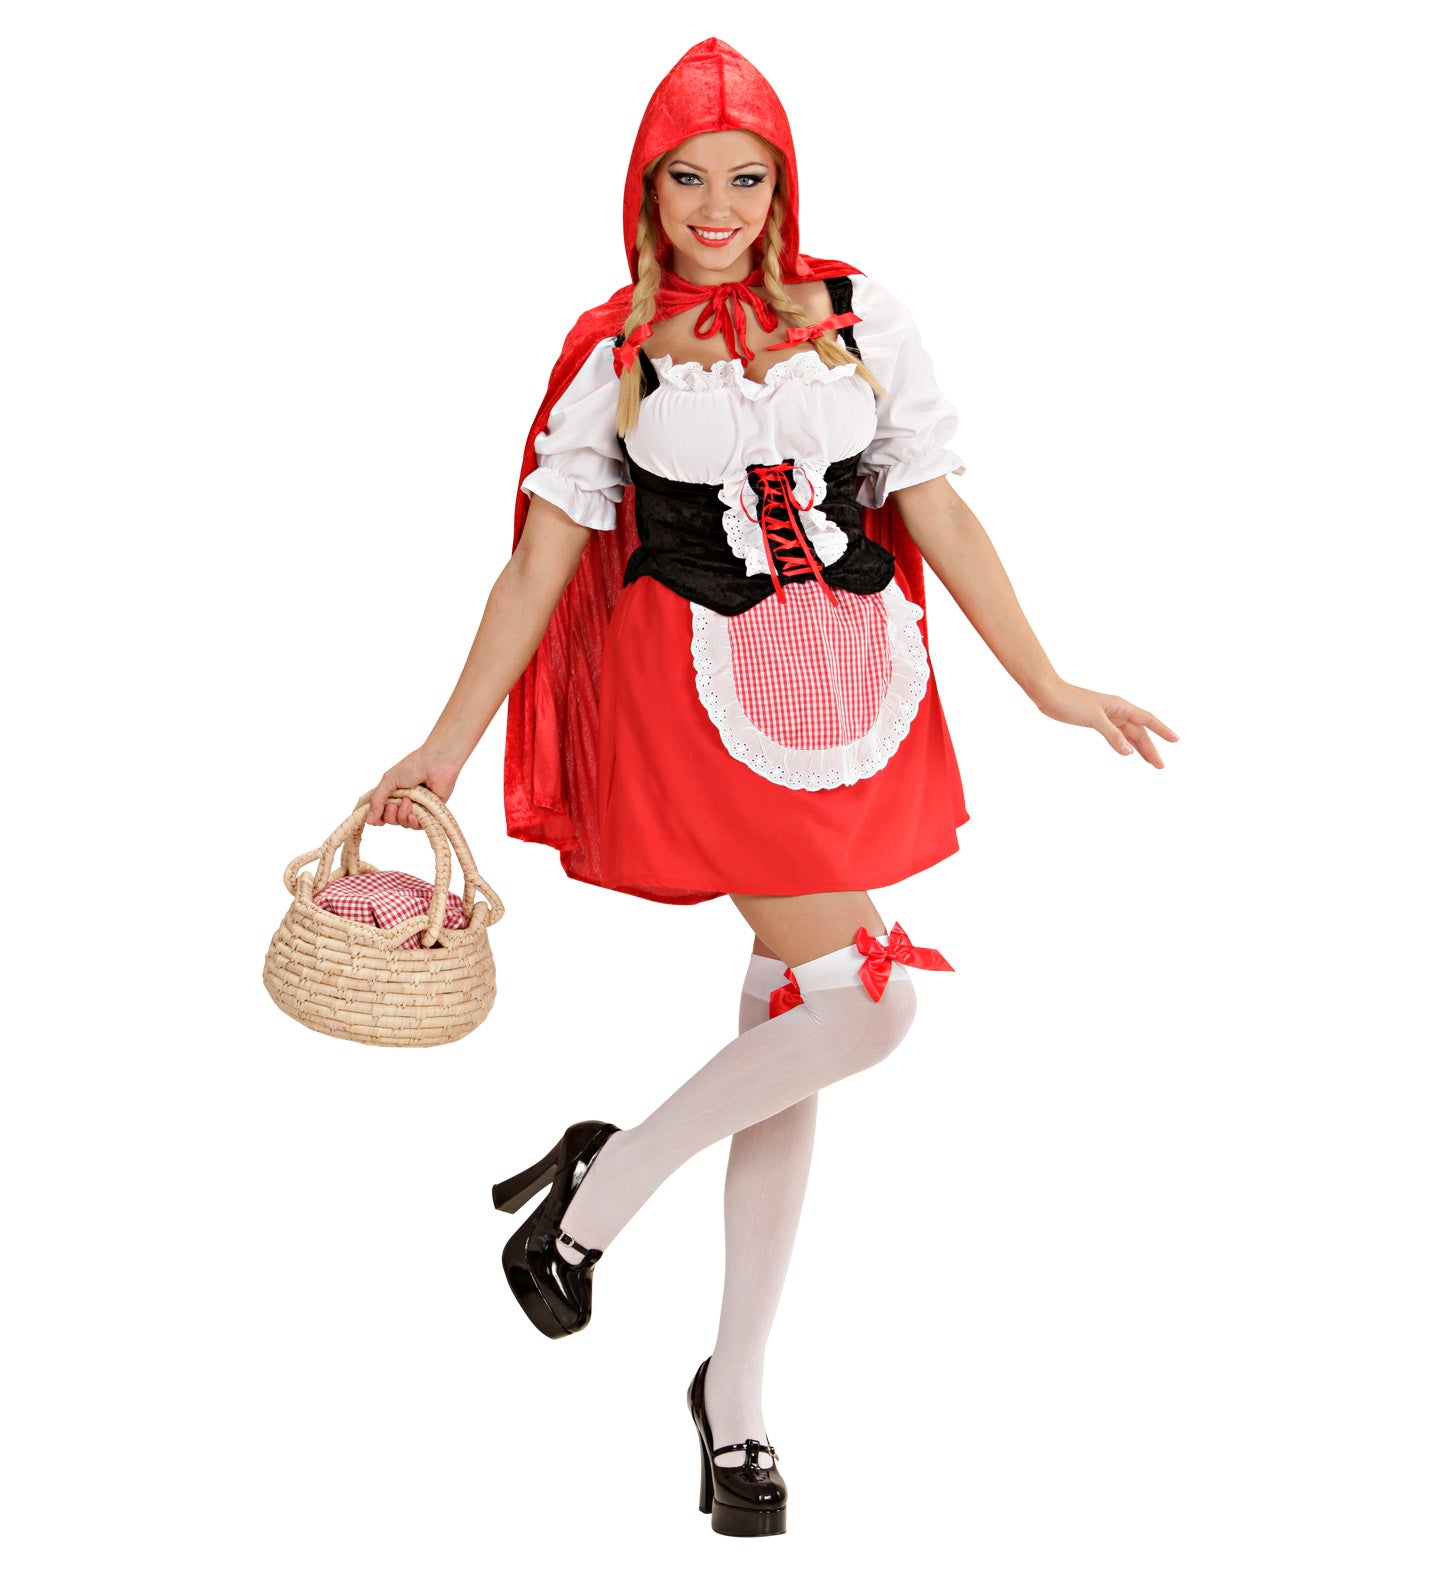 Red Riding Hood Capelet outfit